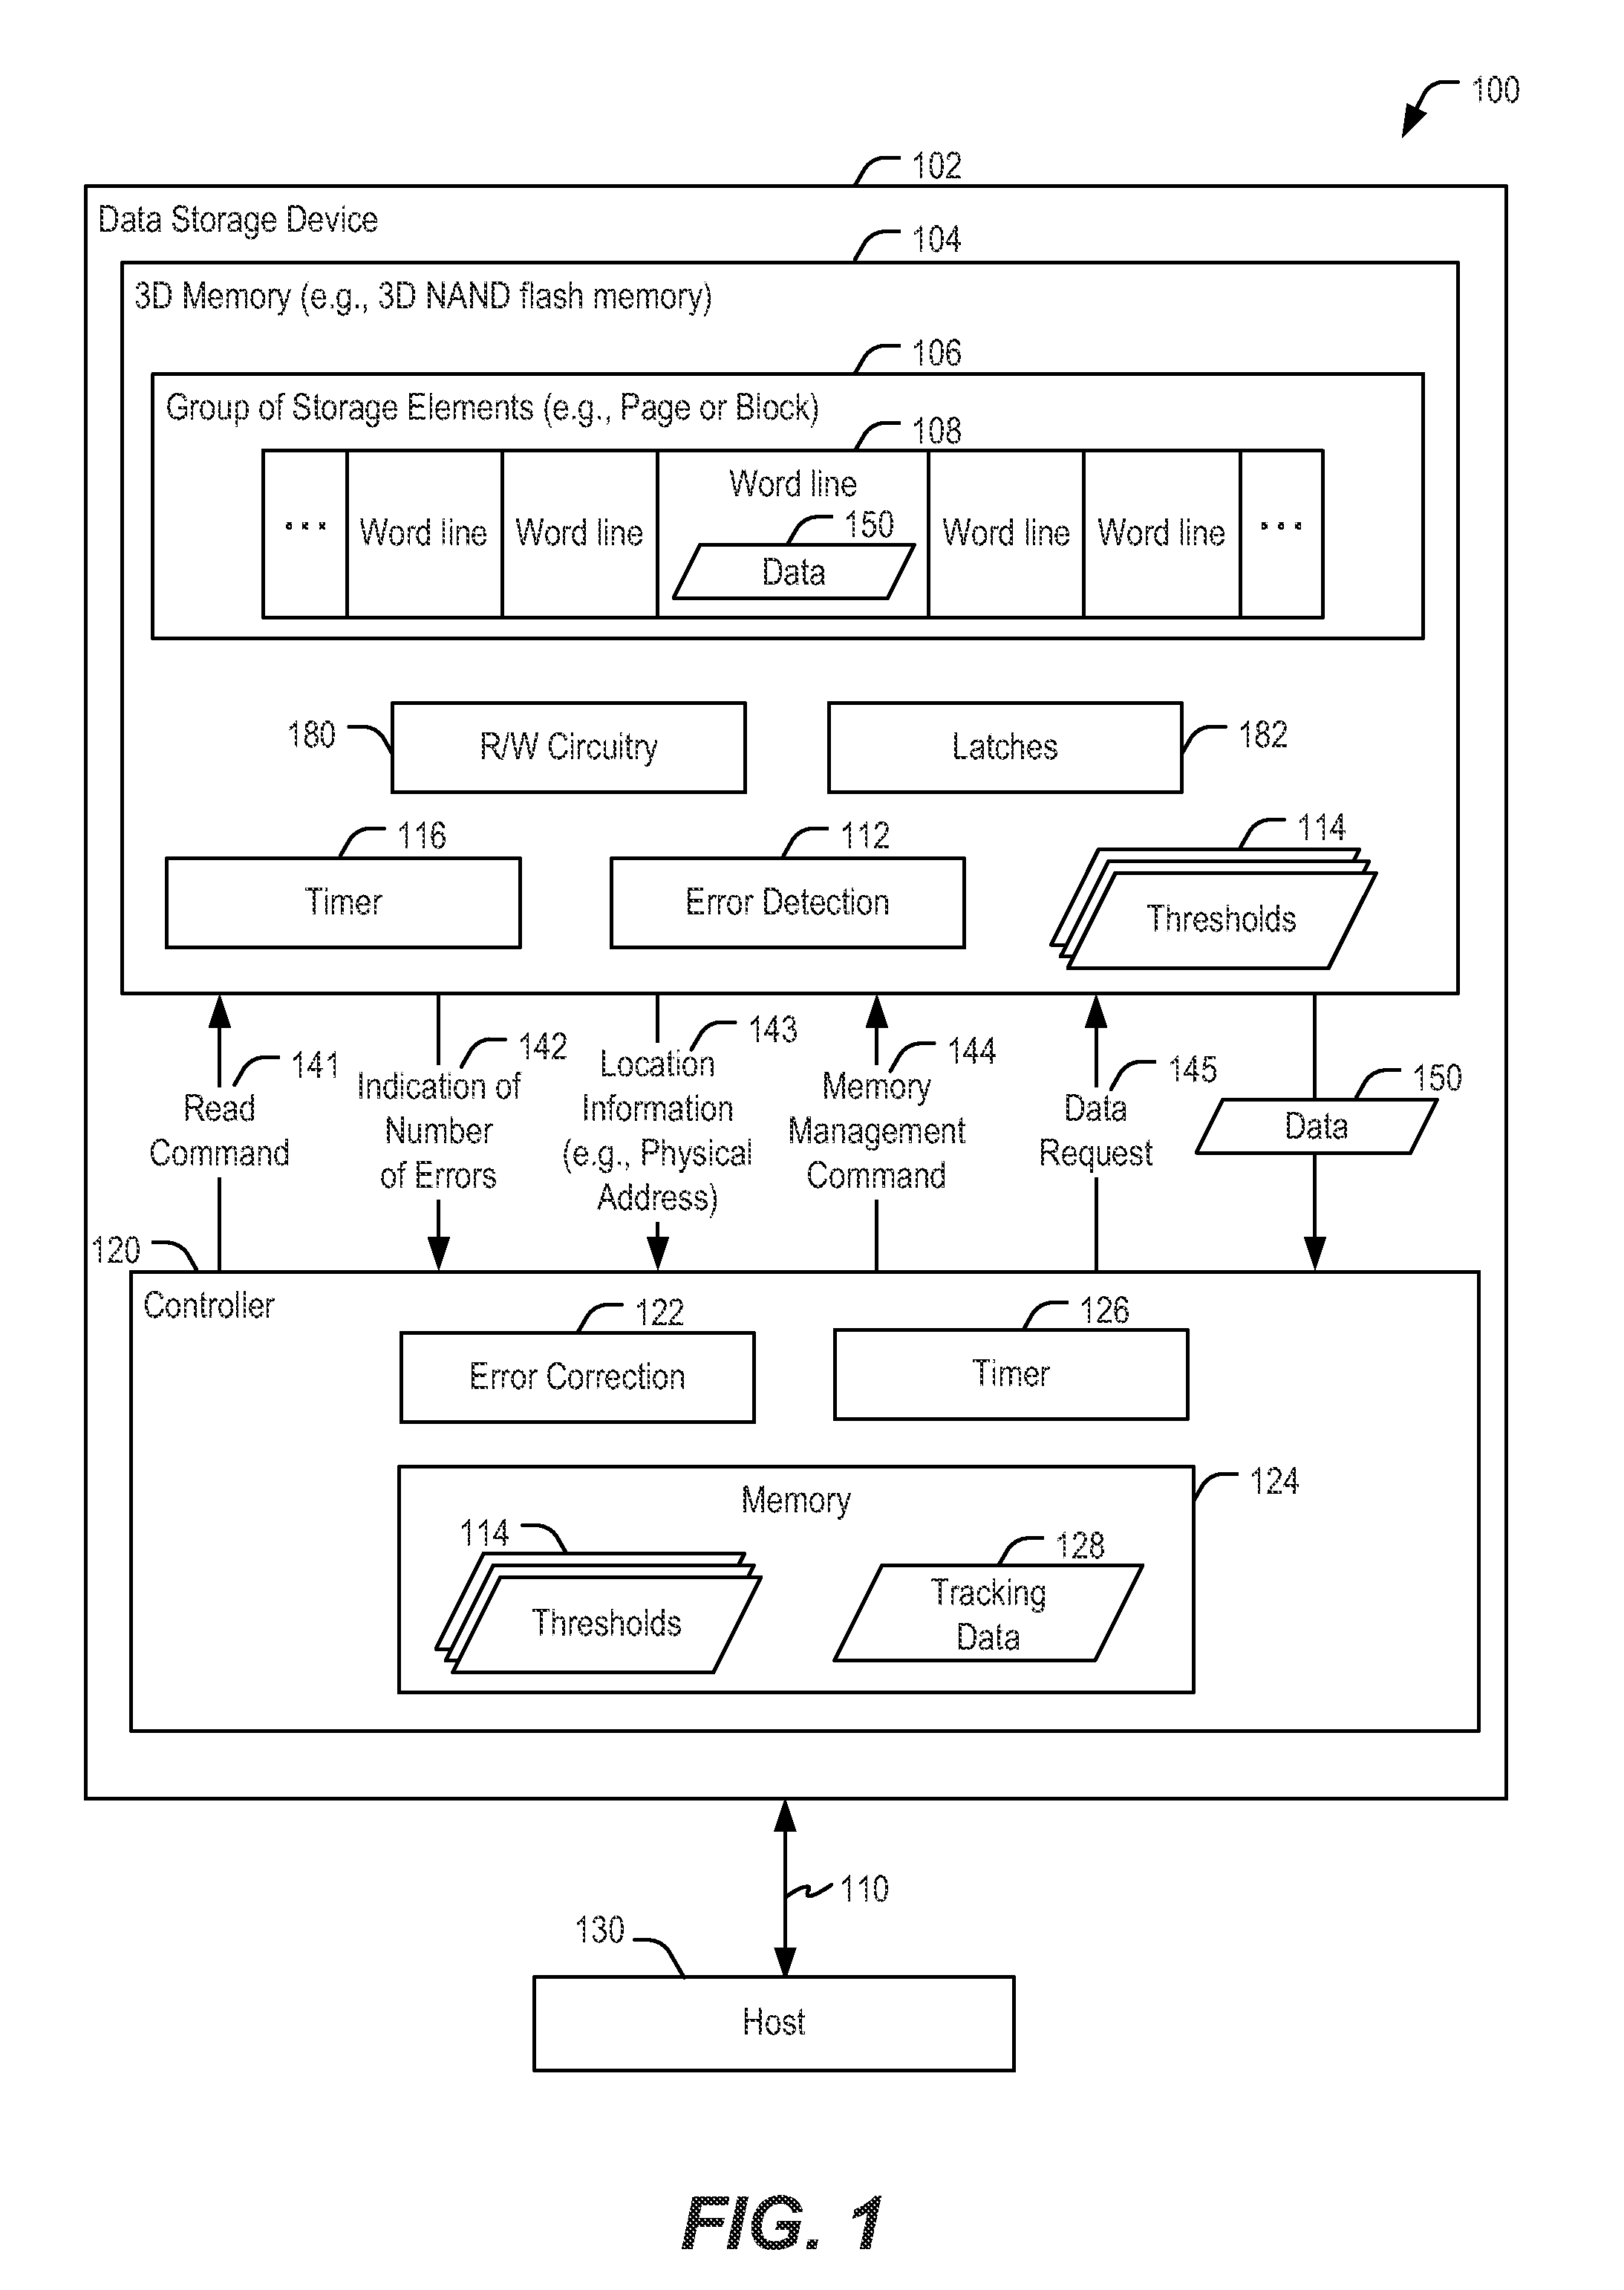 Three dimensional (3D) memory including error detection circuitry